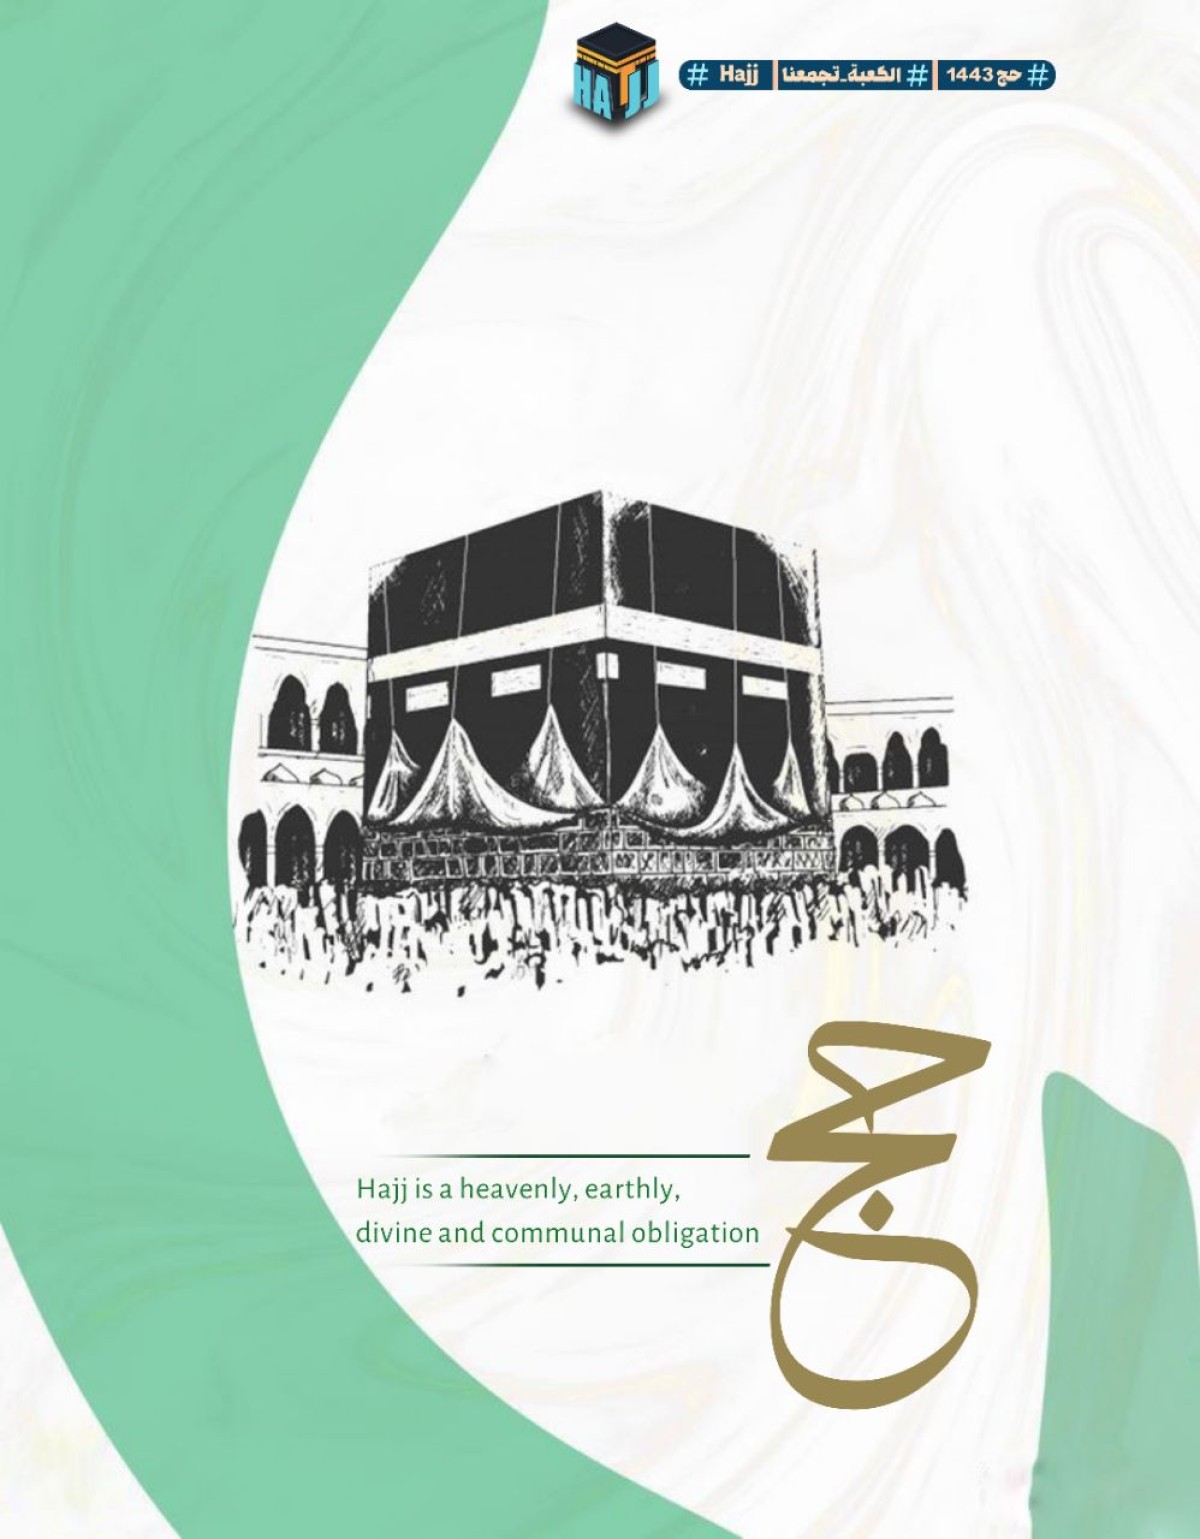 hajj is a heavenly, earthly, divine and communal obligation